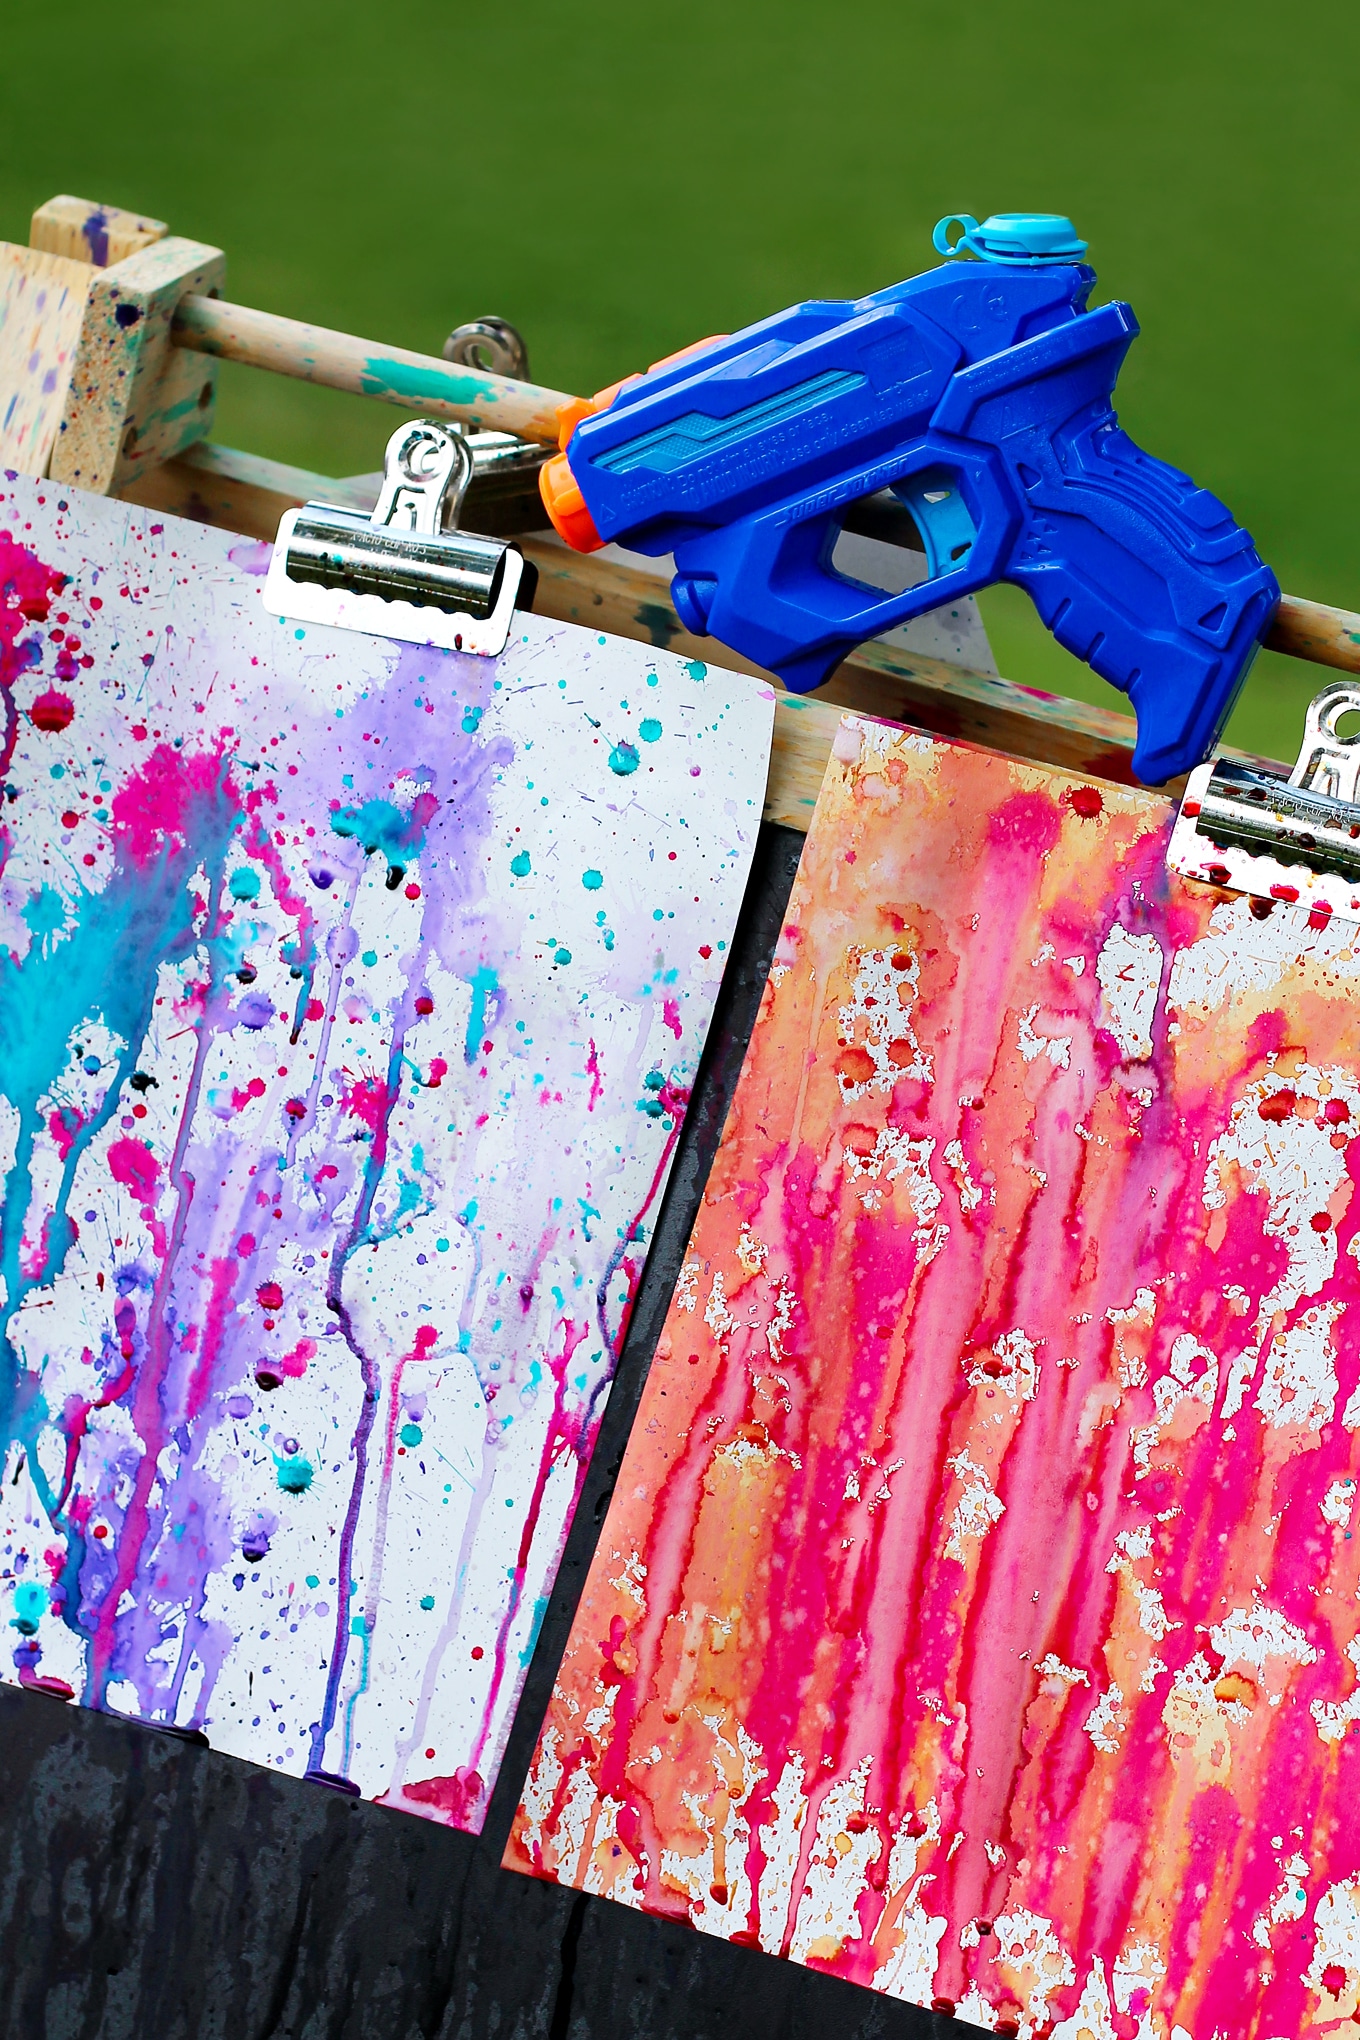 Bust summer boredom at home, school, or camp with Squirt Gun Painting, an amazing art experience for kids of all ages. #squirtgunpainting #squirtpainting #summerart #summerartforkids #summercrafts #watercolorart #kidsart #squirtgunpainting #watergunpainting #summer #kidscrafts via @firefliesandmudpies